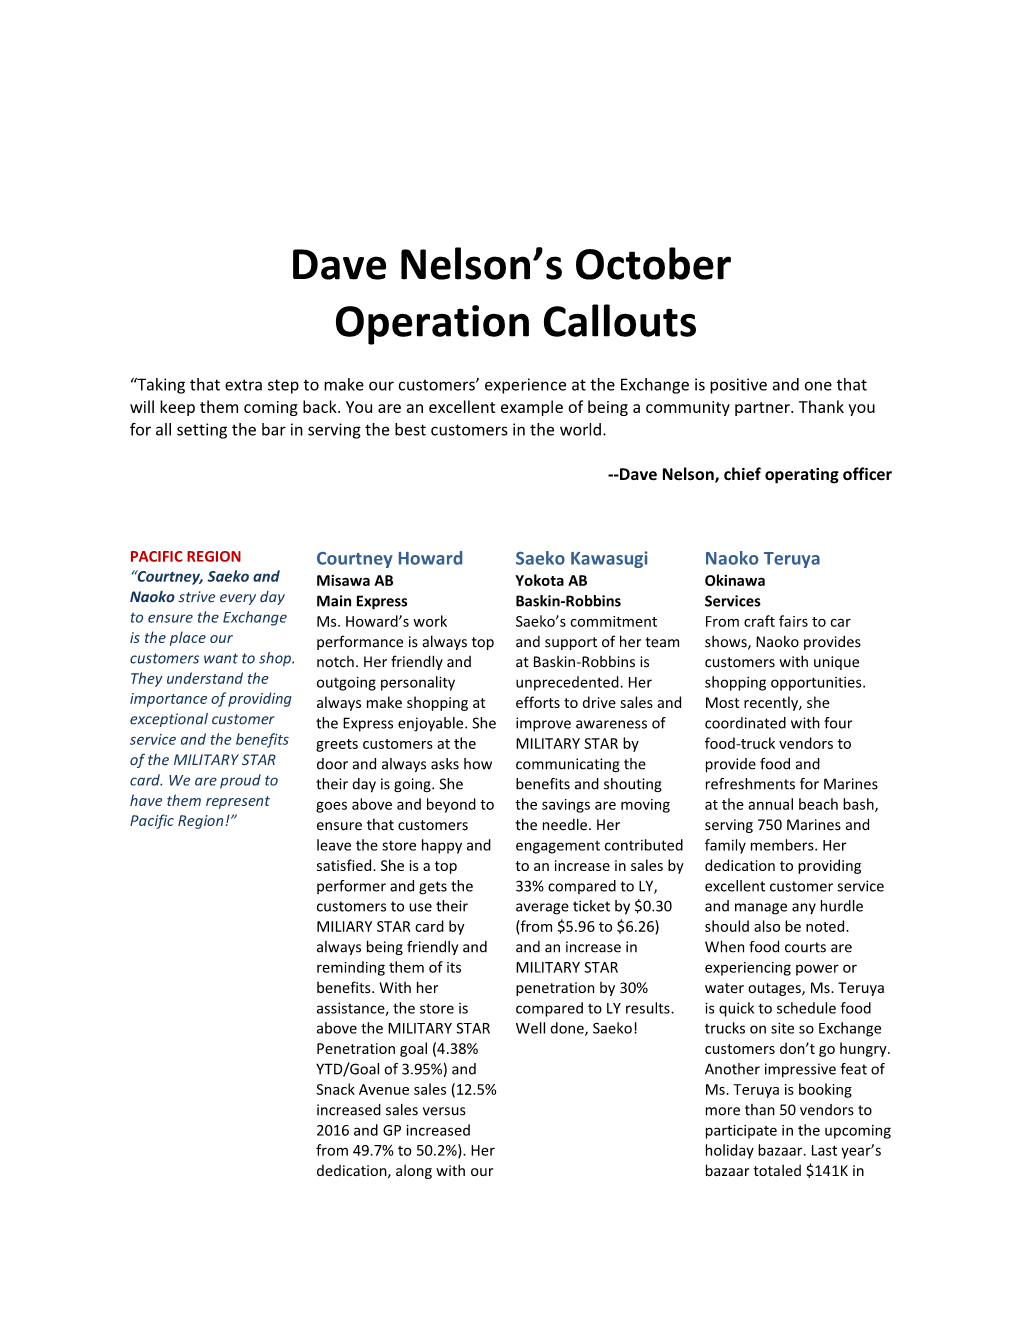 Dave Nelson's October Operation Callouts